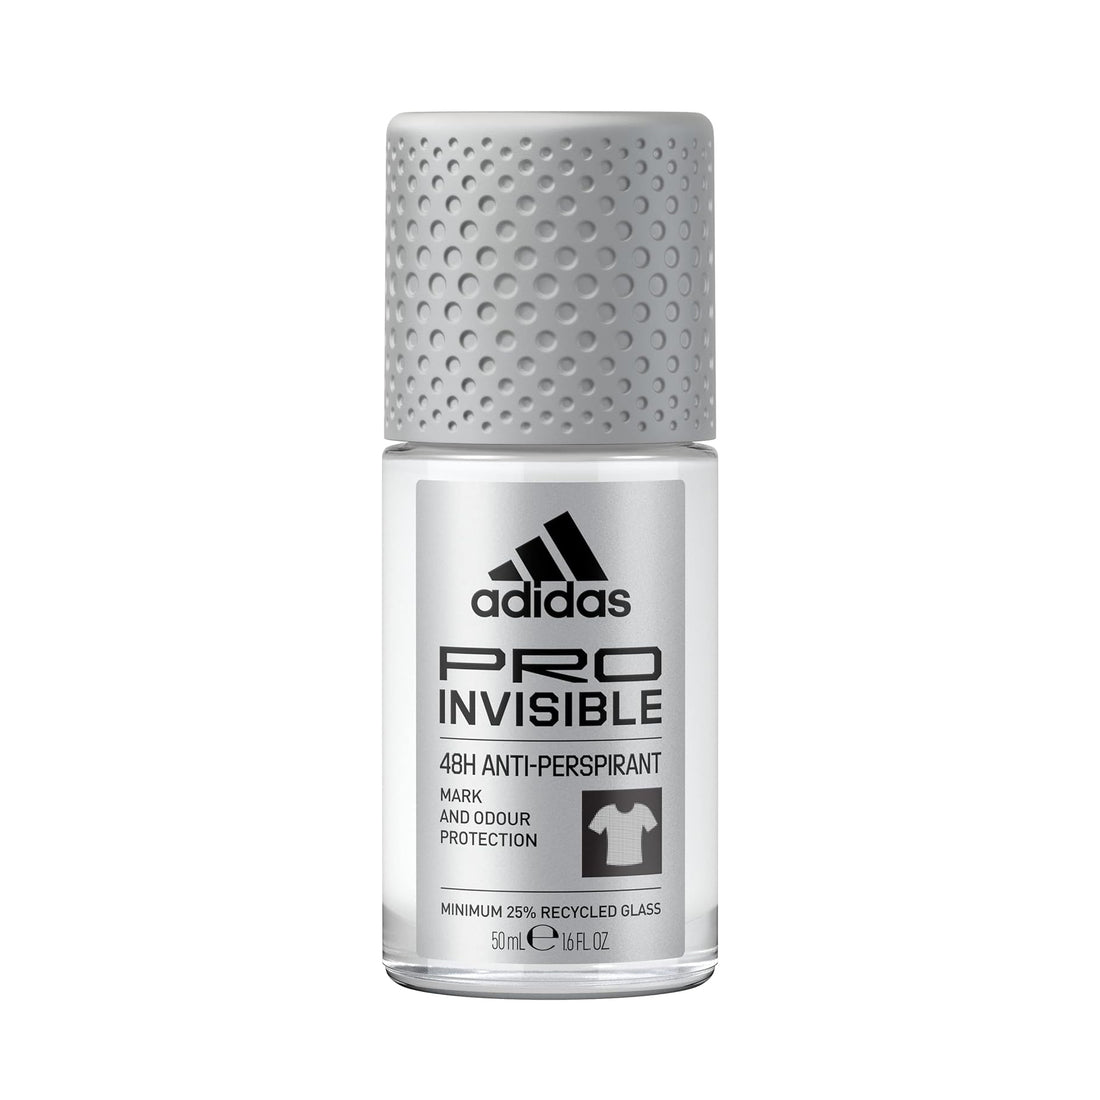 Adidas Pro Invisible 48H Anti-Perspirant Roll-On For Men (50ml)